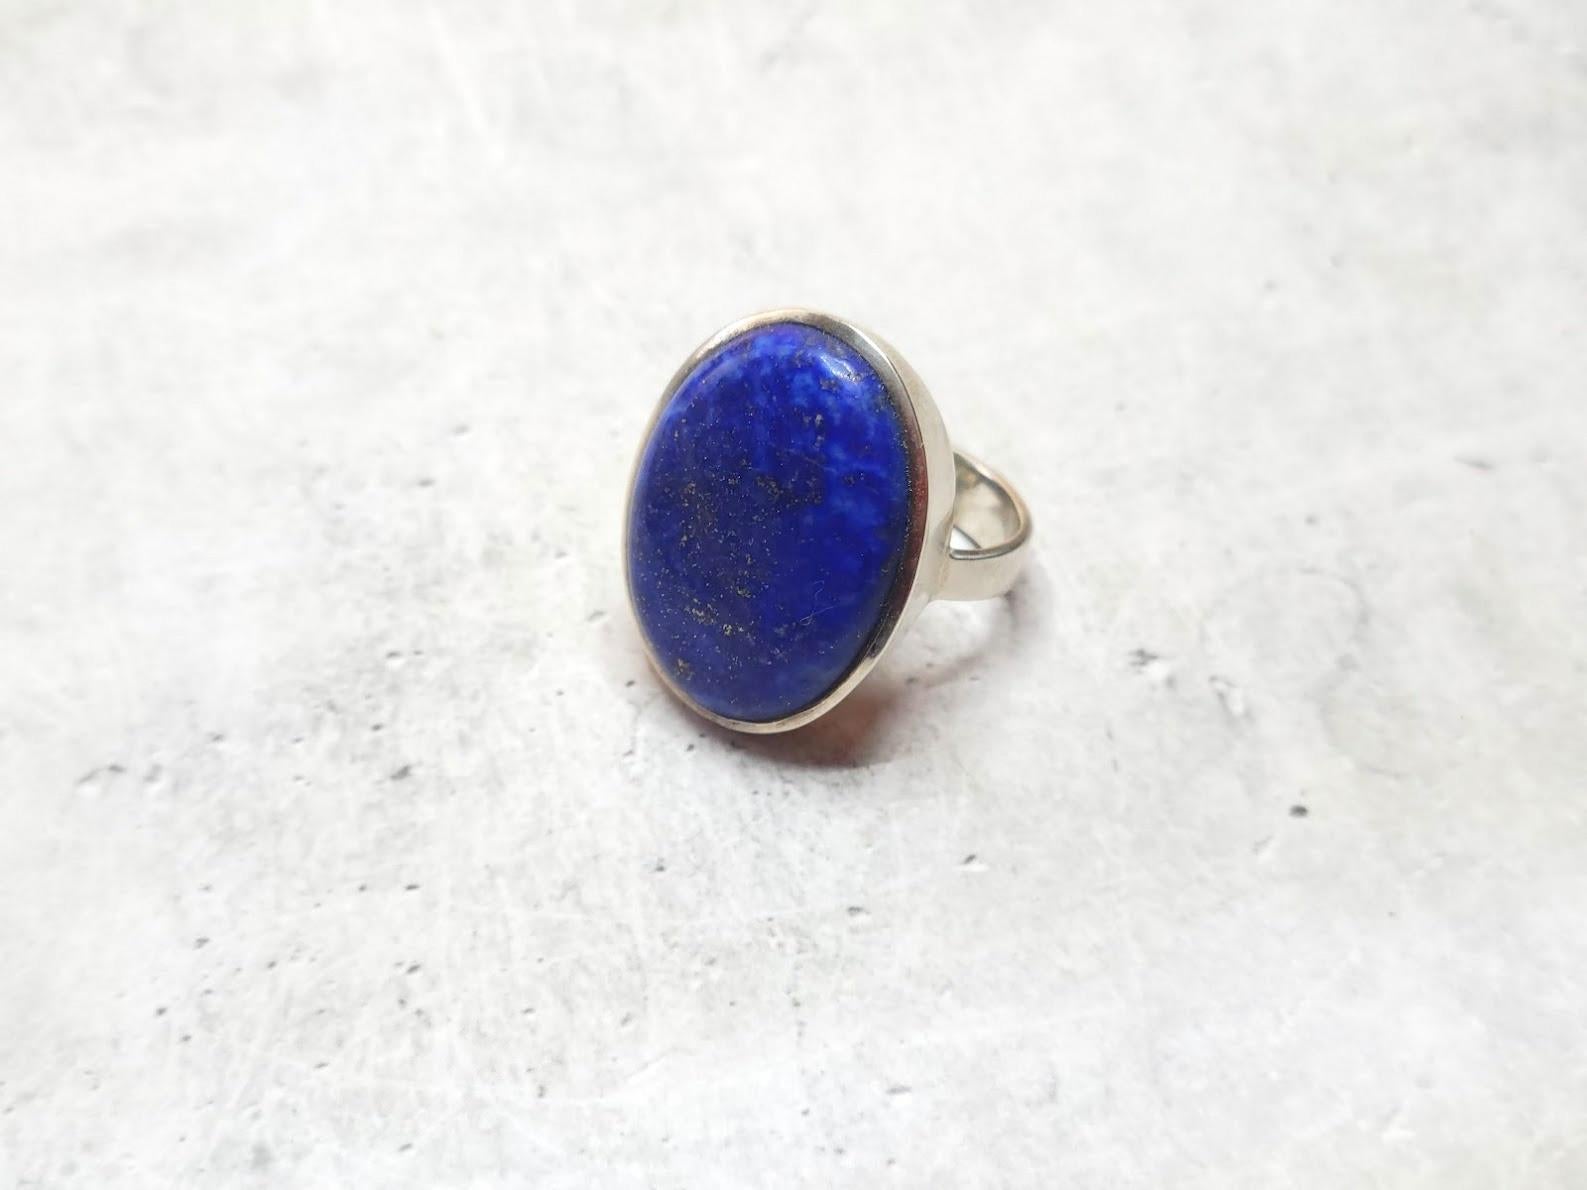 This gorgeous modern, comfortable ring is from a high-quality lapis lazuli cabochon in the sterling silver set.

The Afghan lapis lazuli stone is approximately 30mm long and 20mm across. 
The US size of the ring is 10. 
The weight of the ring is